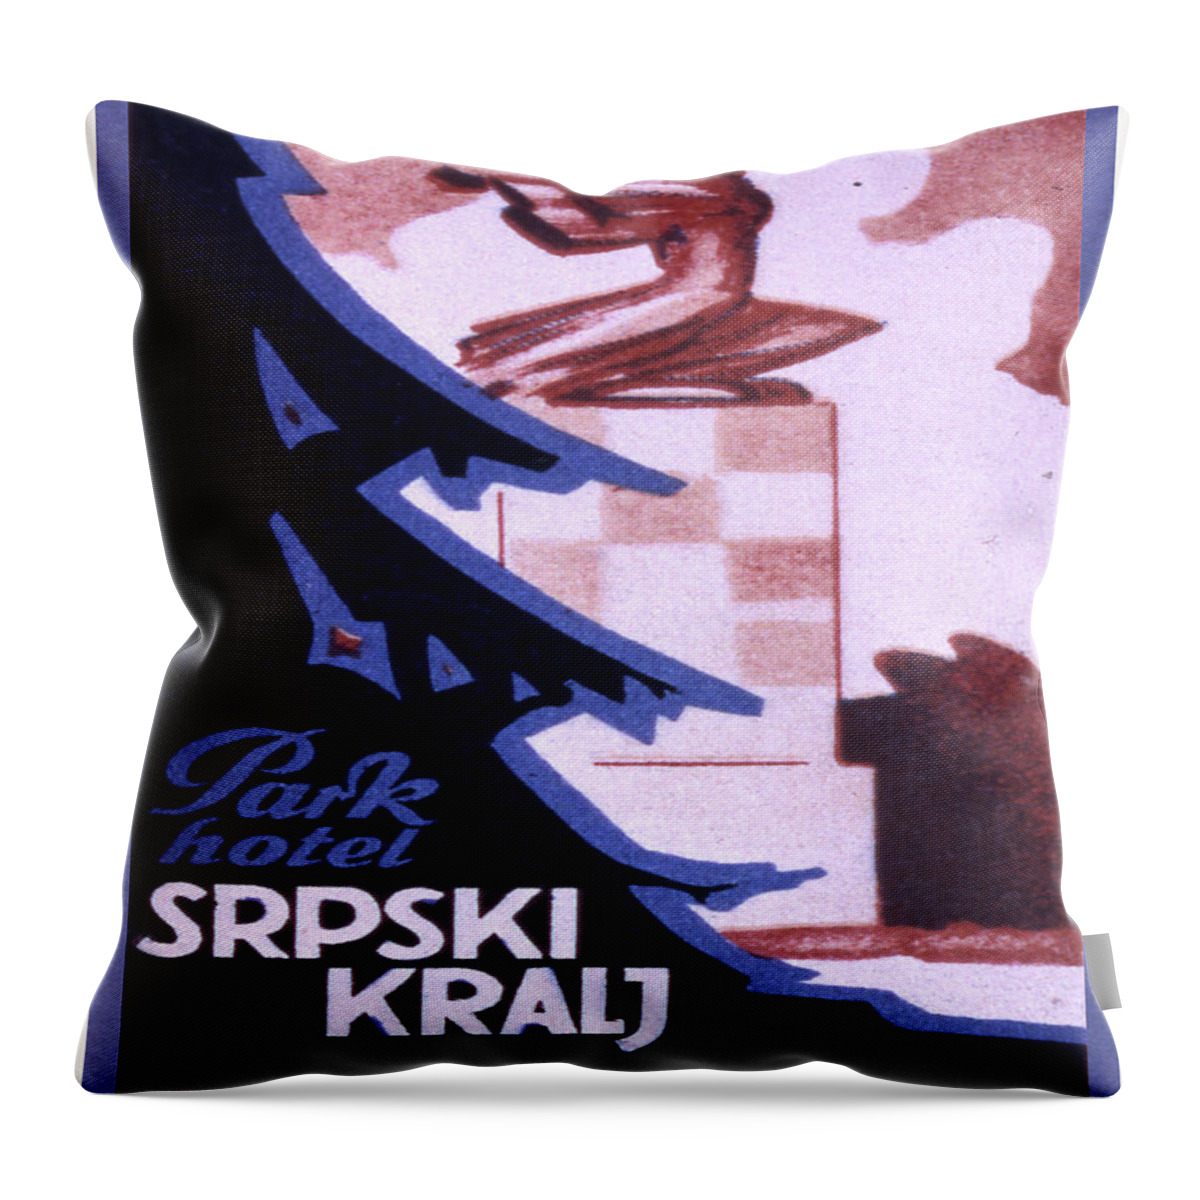 Luggage Throw Pillow featuring the painting Park Hotel #4 by Unknown